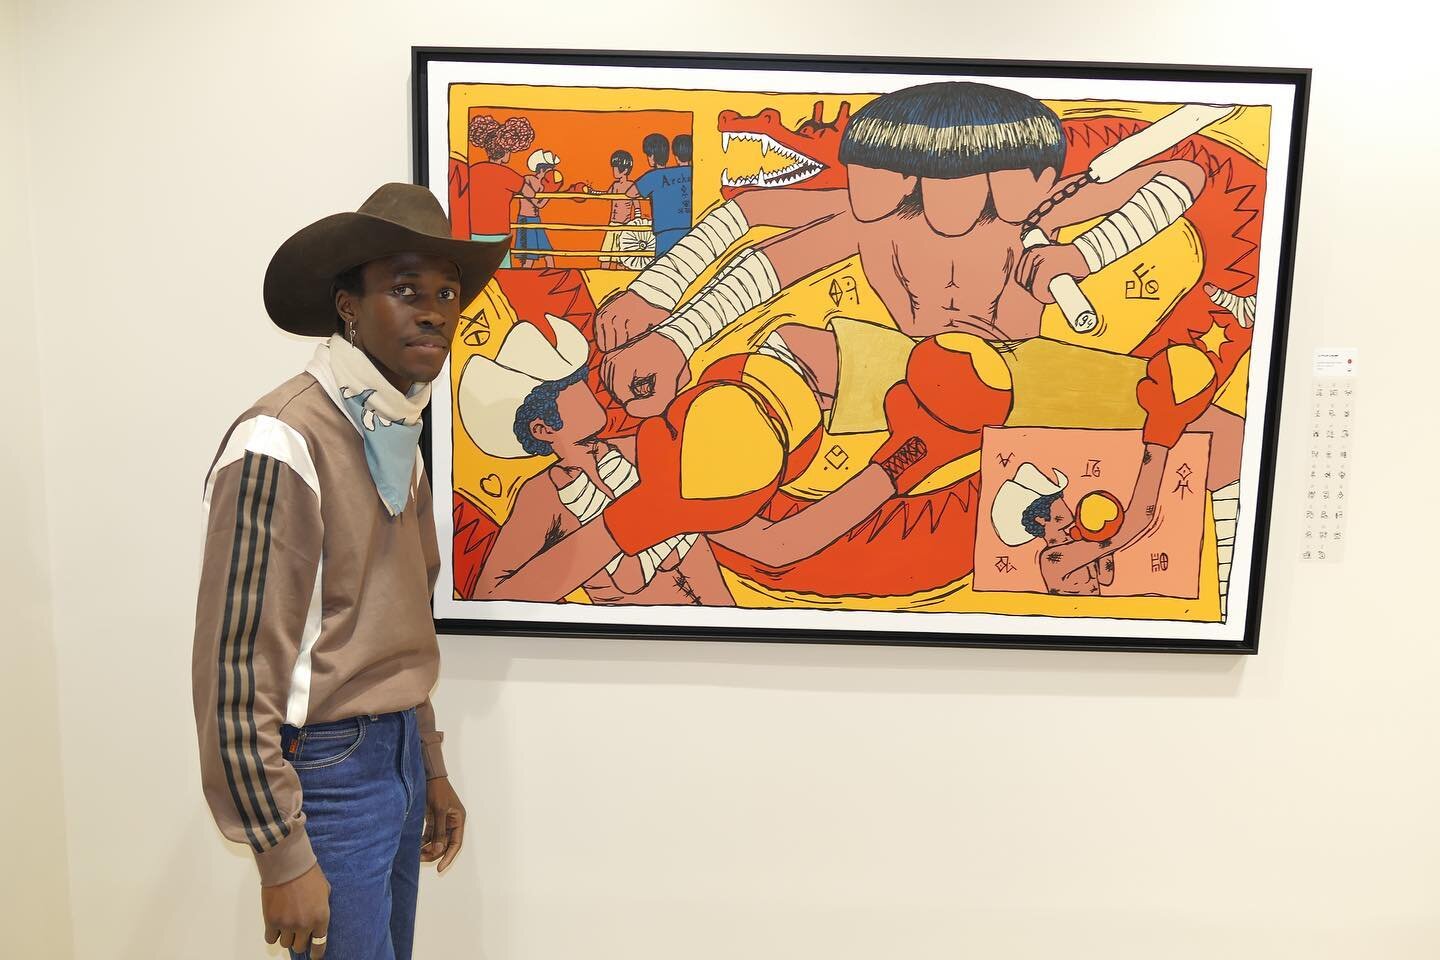 Pulled up on Jakman&rsquo;s MMH exhibition in Paris this week and also got the opportunity to speak with him and his team. 

A man of many talents I learned about him and how his experiences have shaped his artwork with Family, Friends and simply jus